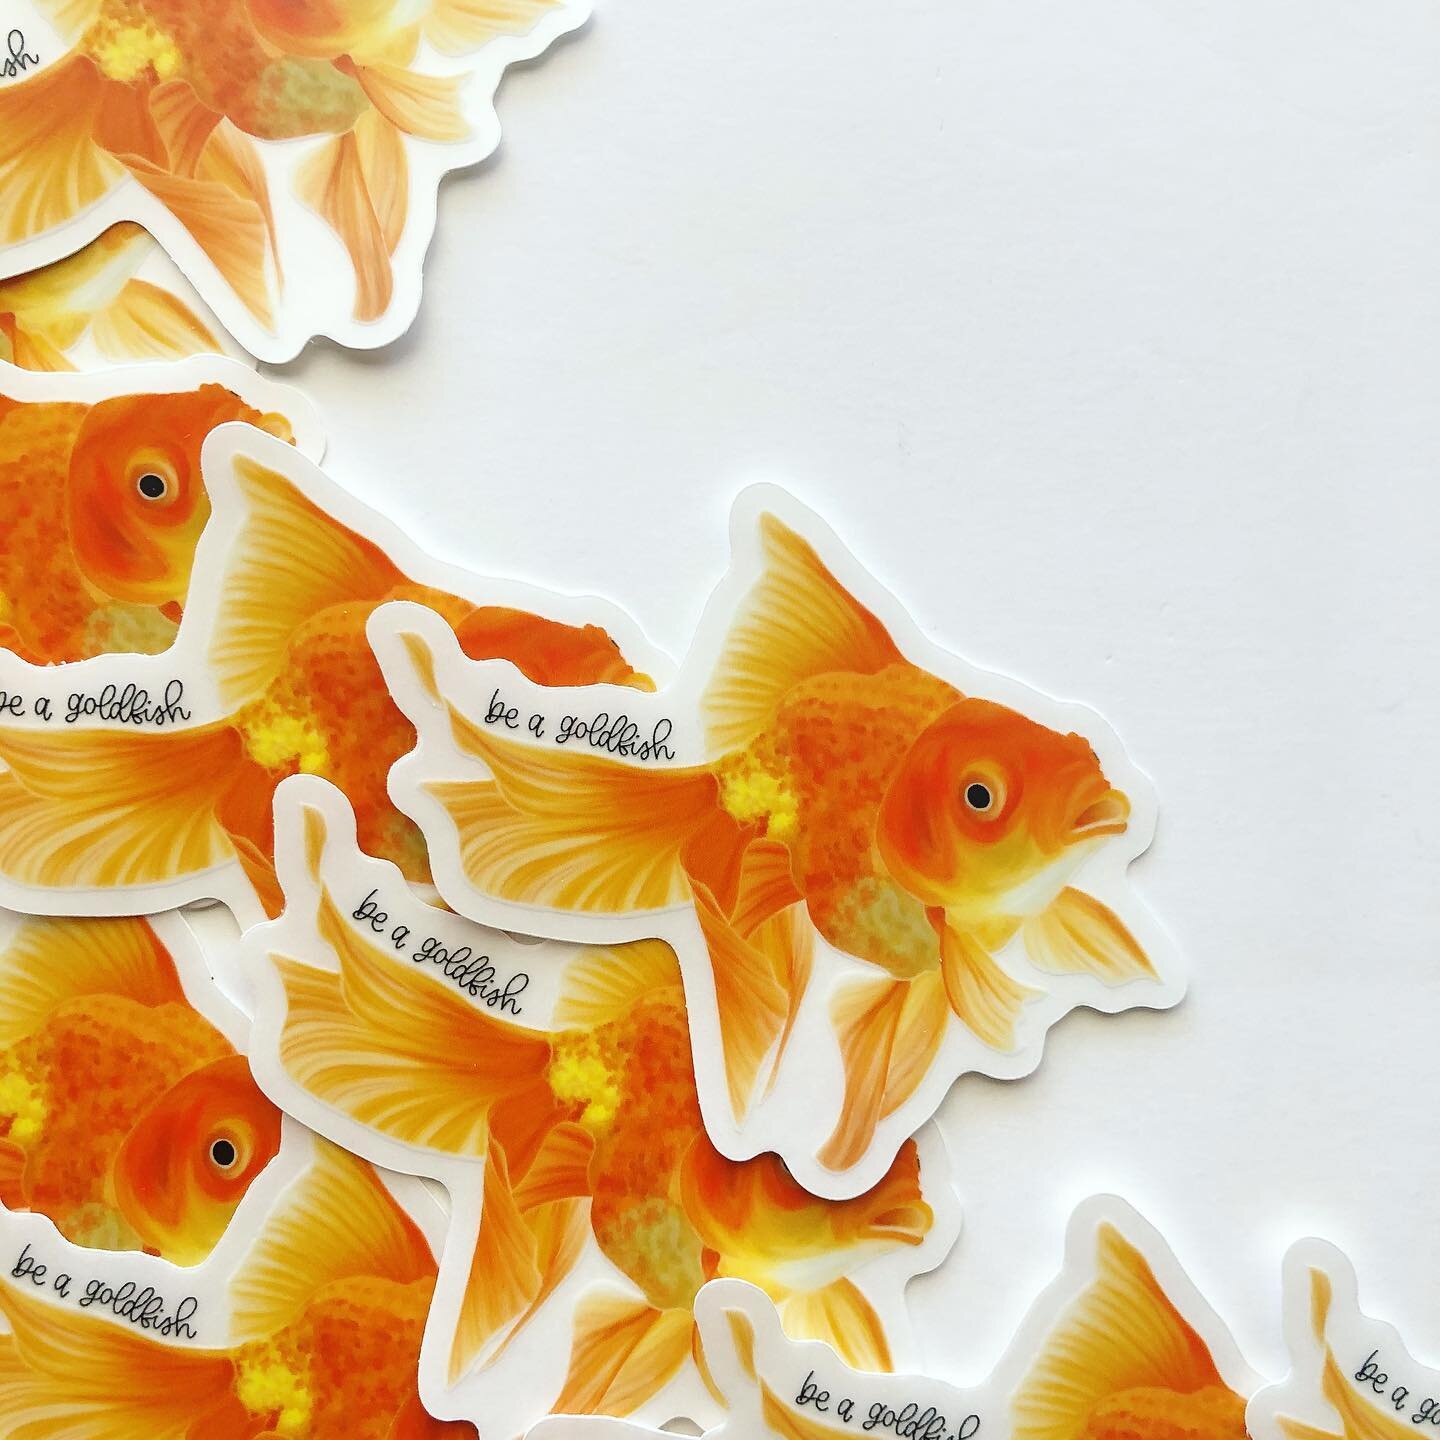 Ted Lasso was nominated for several Emmys today- celebrate by grabbing some stickers, a print, or the Ted Lasso combo pack! 🎉

#tedlasso #beagoldfish #goldfish #emmynominations #lasso #fish #fishsticker #swimming #art #stickerart #etsyshop #handlett